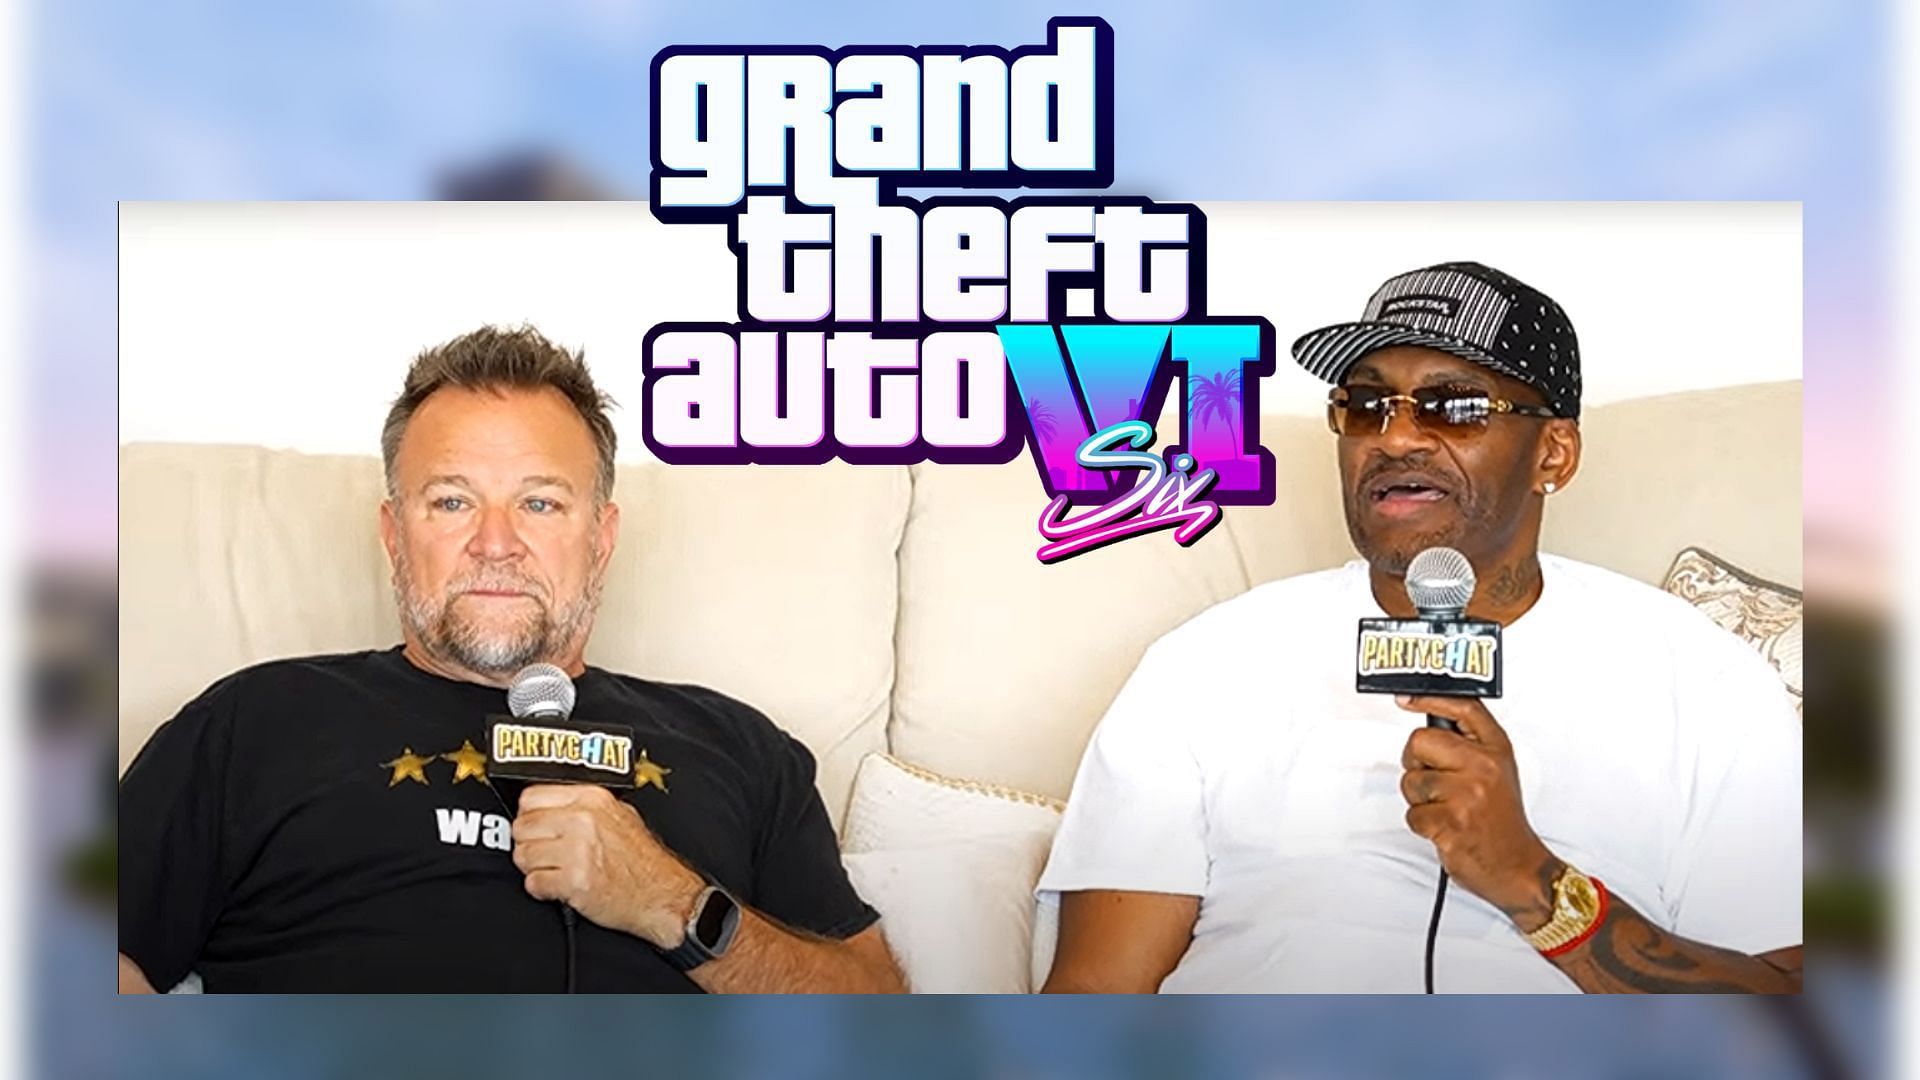 A brief report on GTA 5 voice actors Shawn Fonteno and Ned Luke responding to Grand Theft Auto 6 rumours (Image via Sportskeeda/PARTYCHAT)